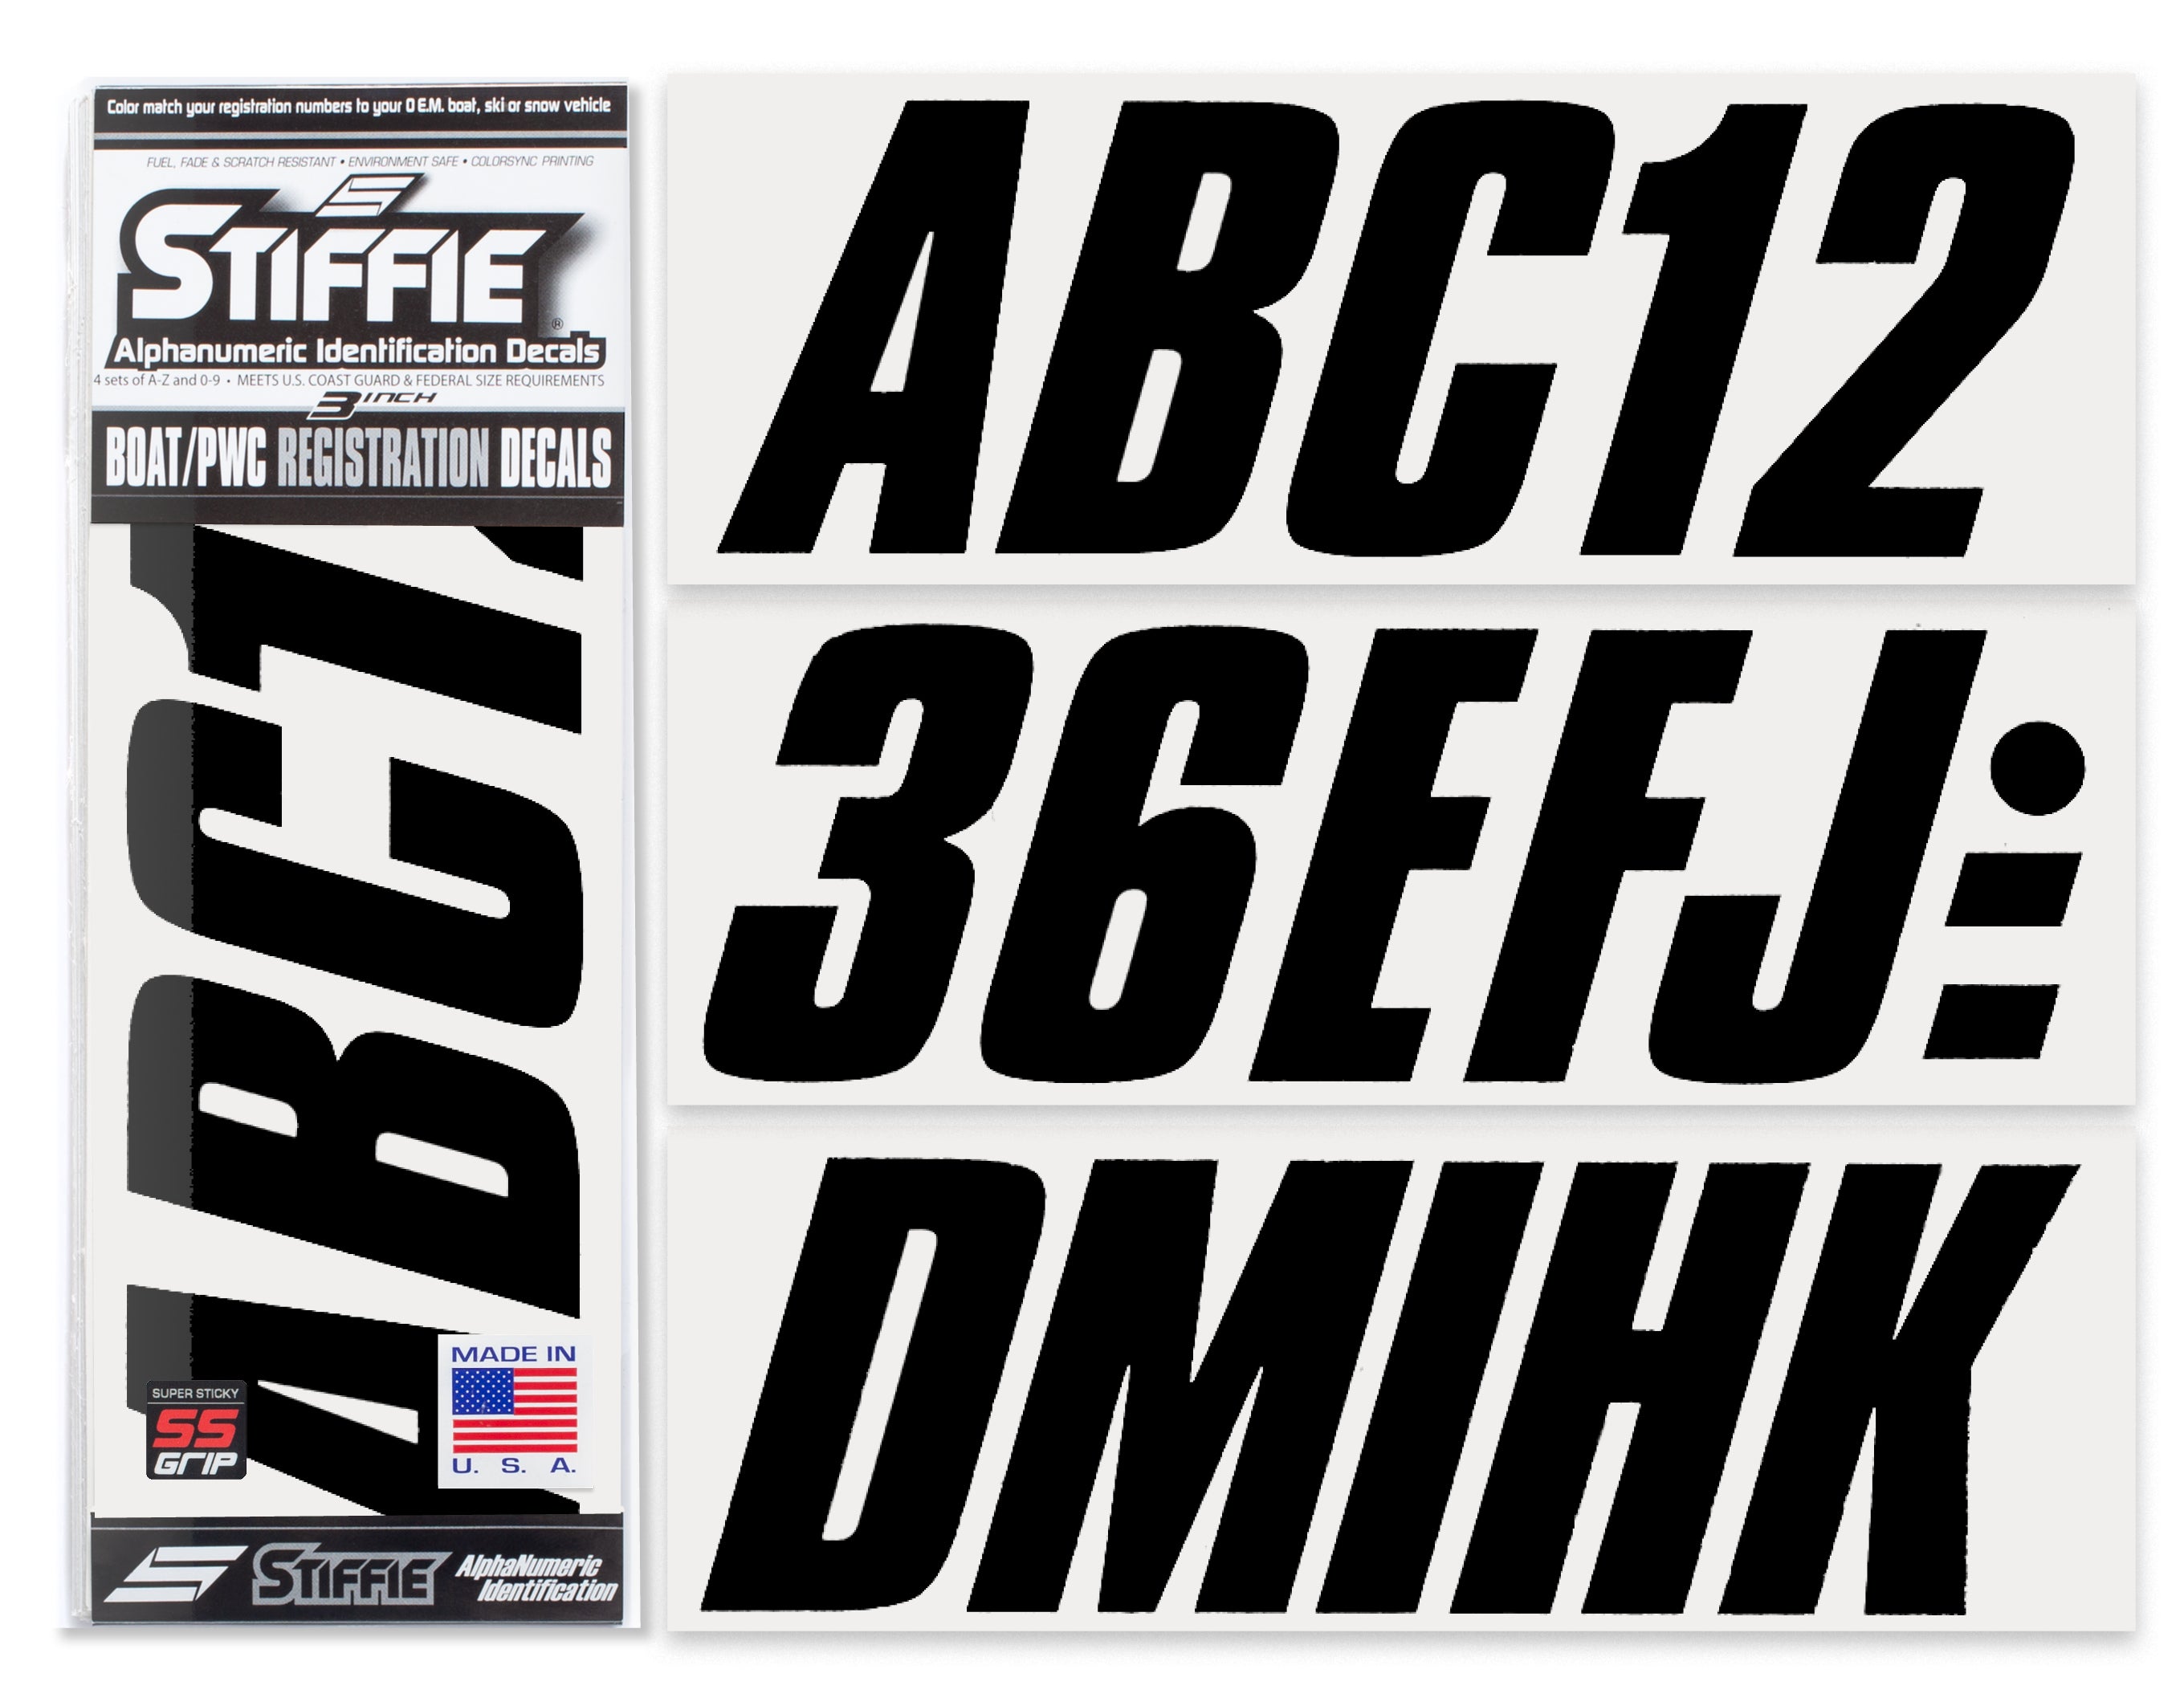 STIFFIE Shift Black Super Sticky 3" Alpha Numeric Registration Identification Numbers Stickers Decals for Sea-Doo Spark, Inflatable Boats, Ribs, Hypalon/PVC, PWC and Boats.